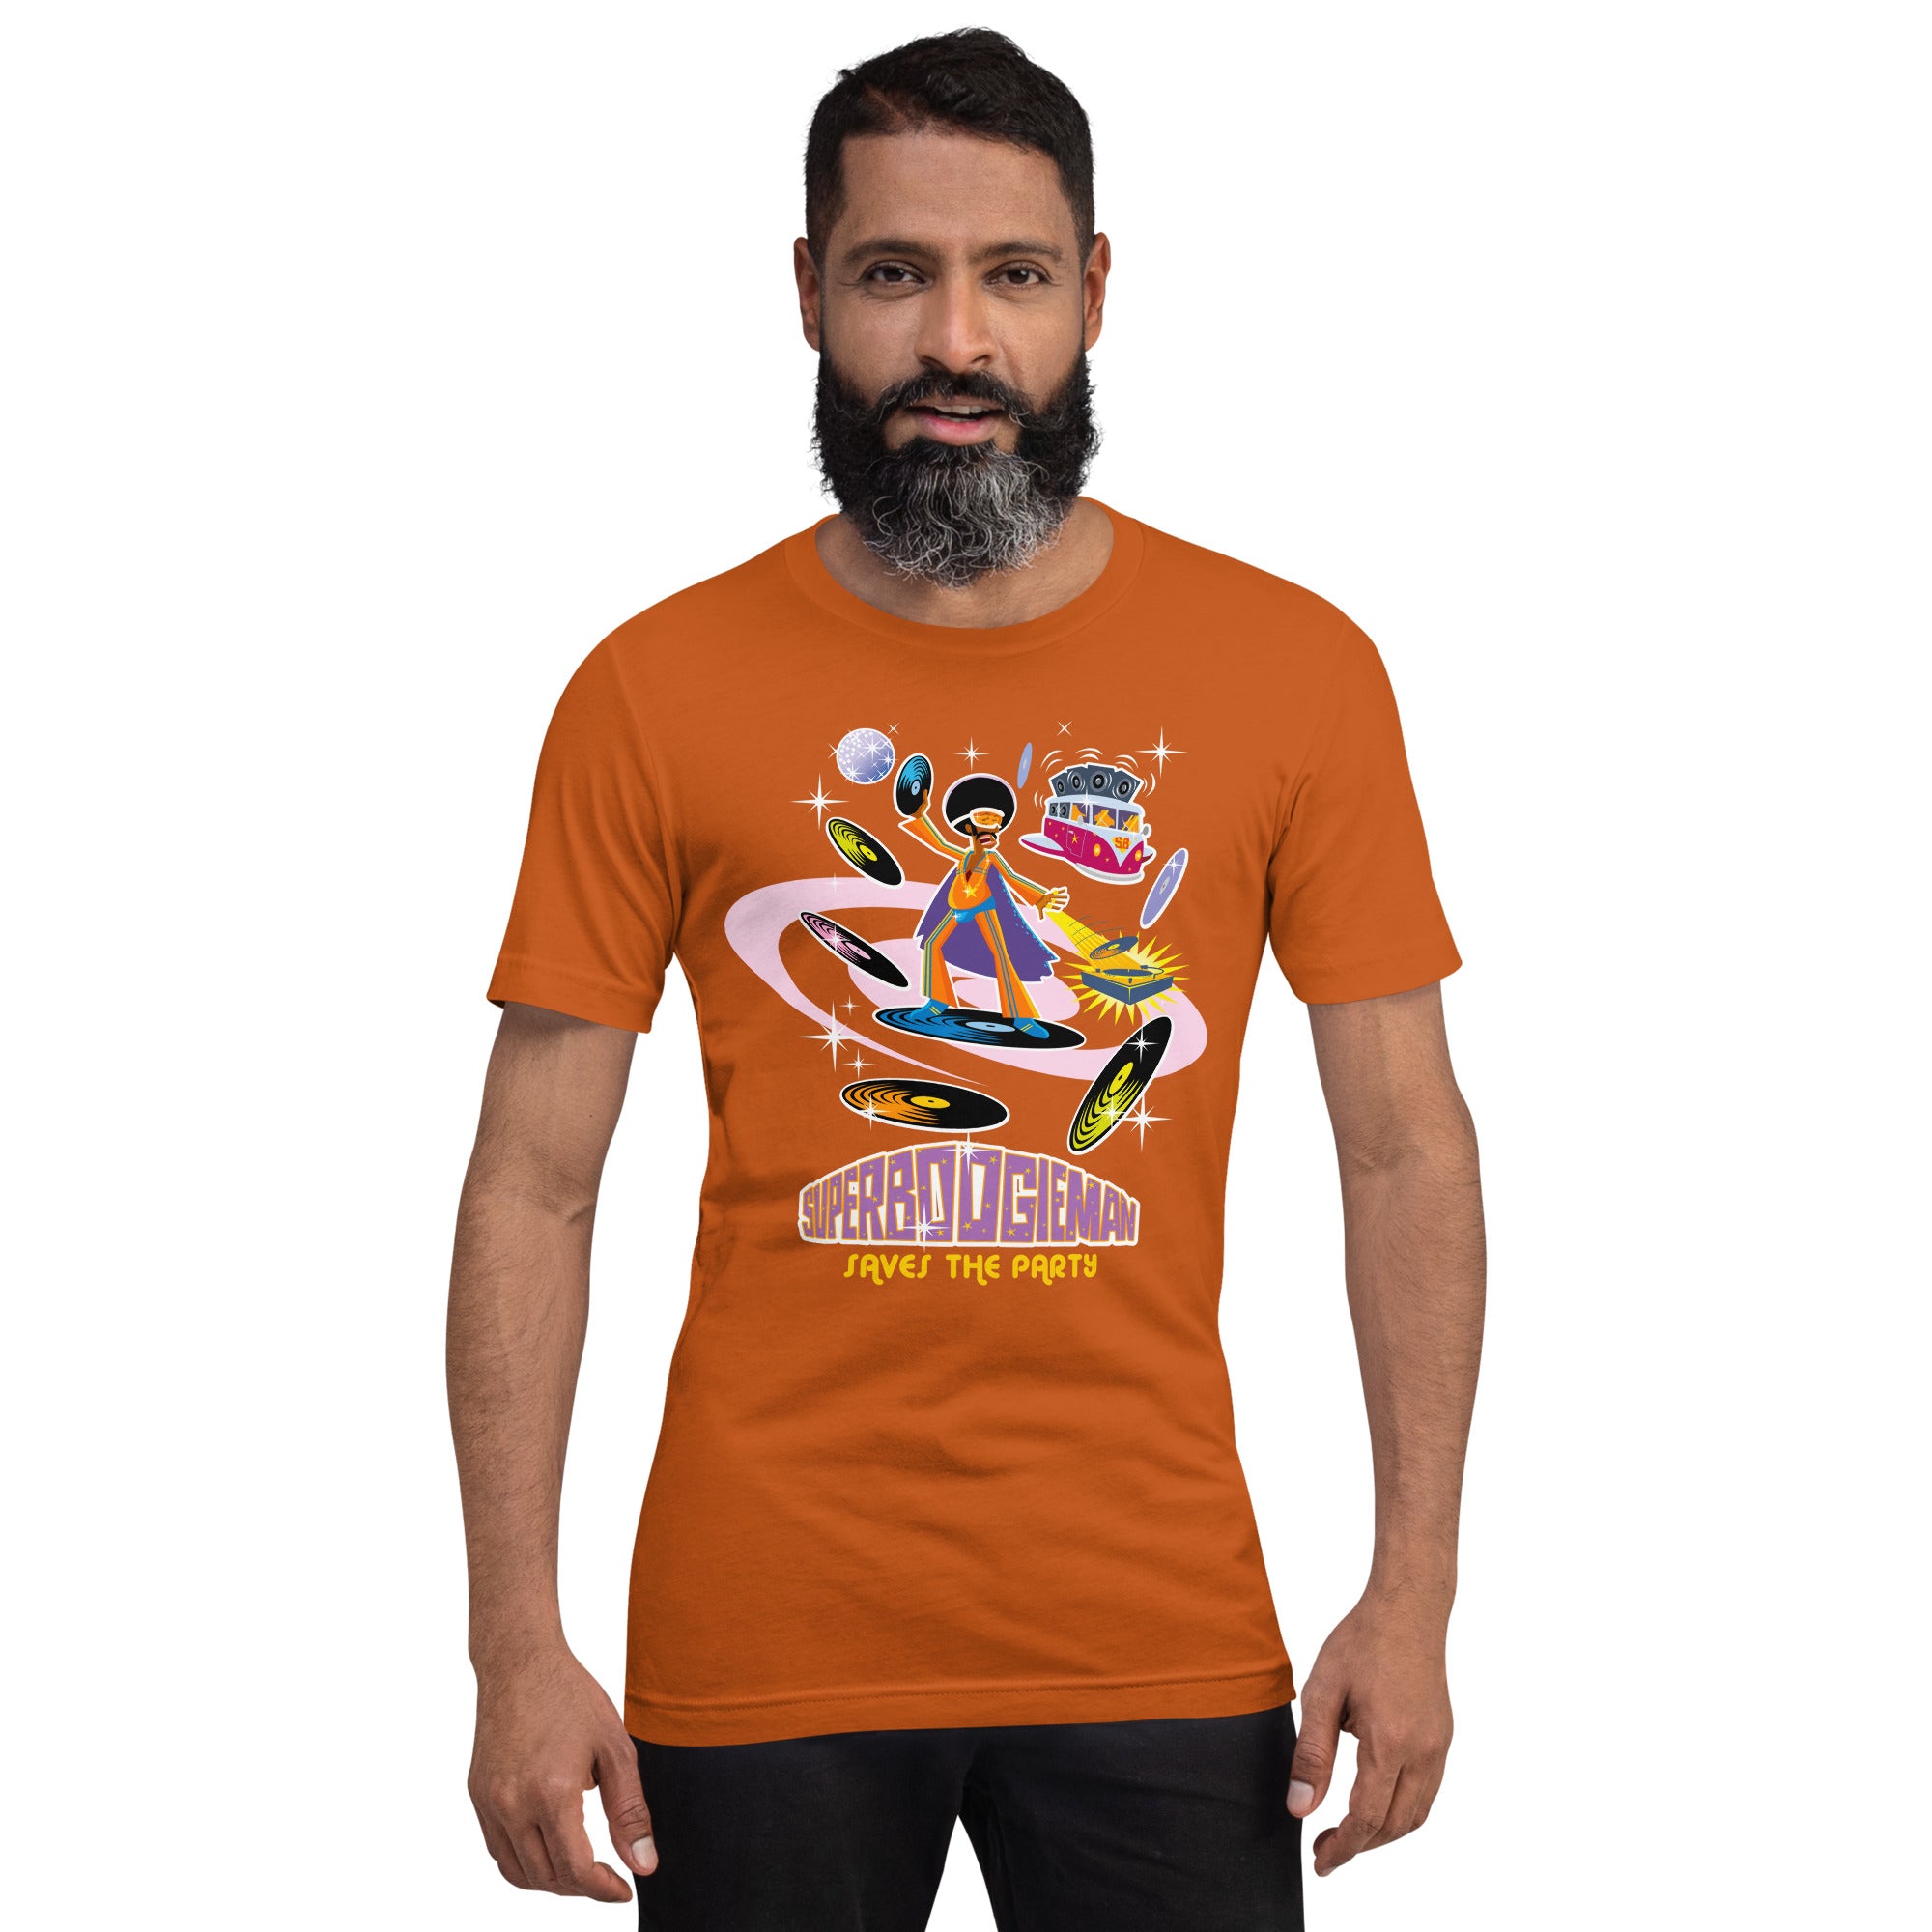 Unisex cotton t-shirt Superboogieman saves the Party on bright colors